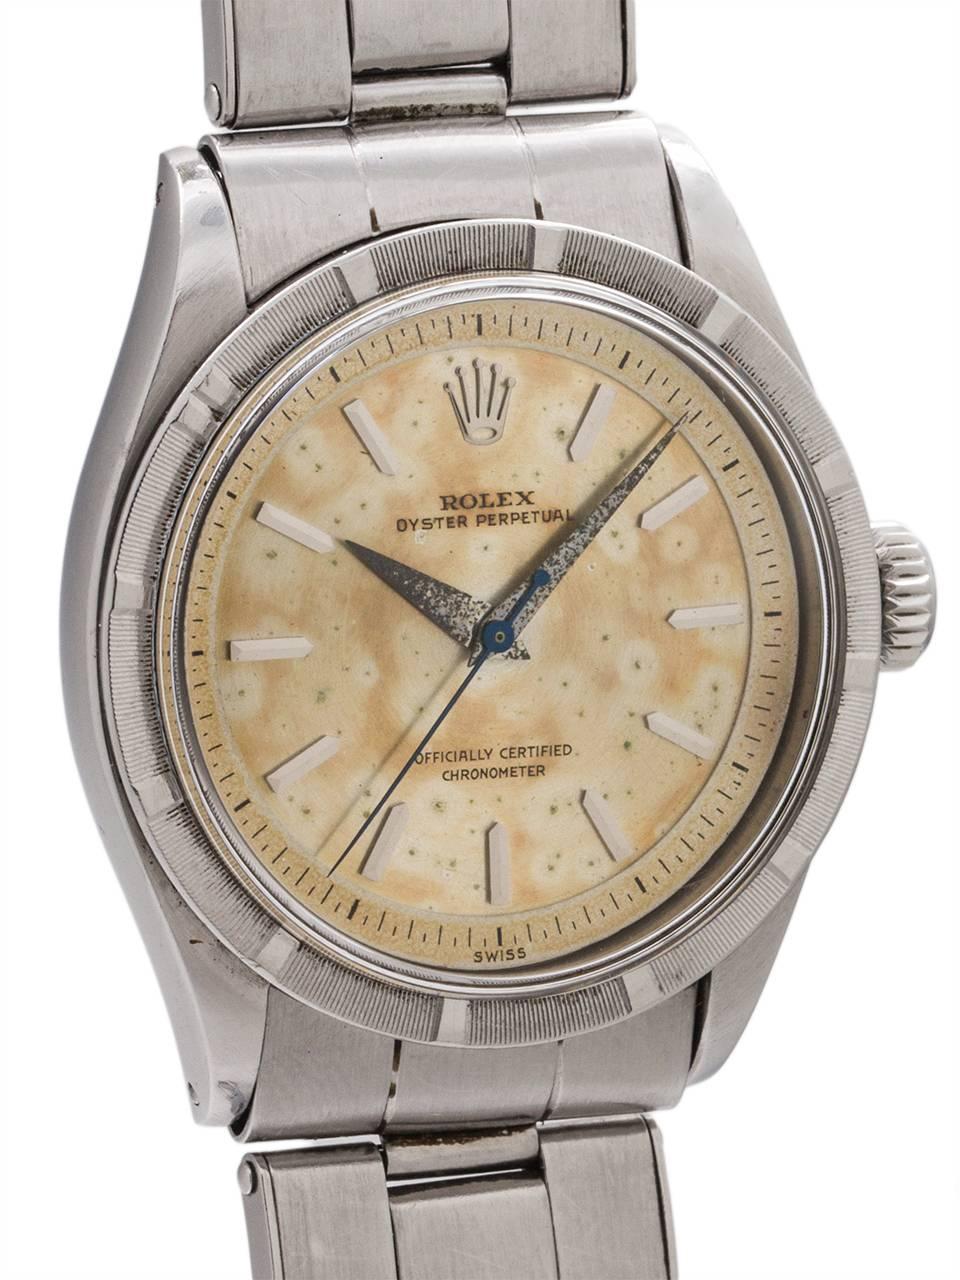 
Rolex Oyster Perpetual ref  stainless steel, case serial # 35,xxx circa 1953. Featuring 34mm diameter case with engine turned bezel and remarkable original richly patina’d stepped dial with raised silver  indexes, tapered dauphine hands and warmly